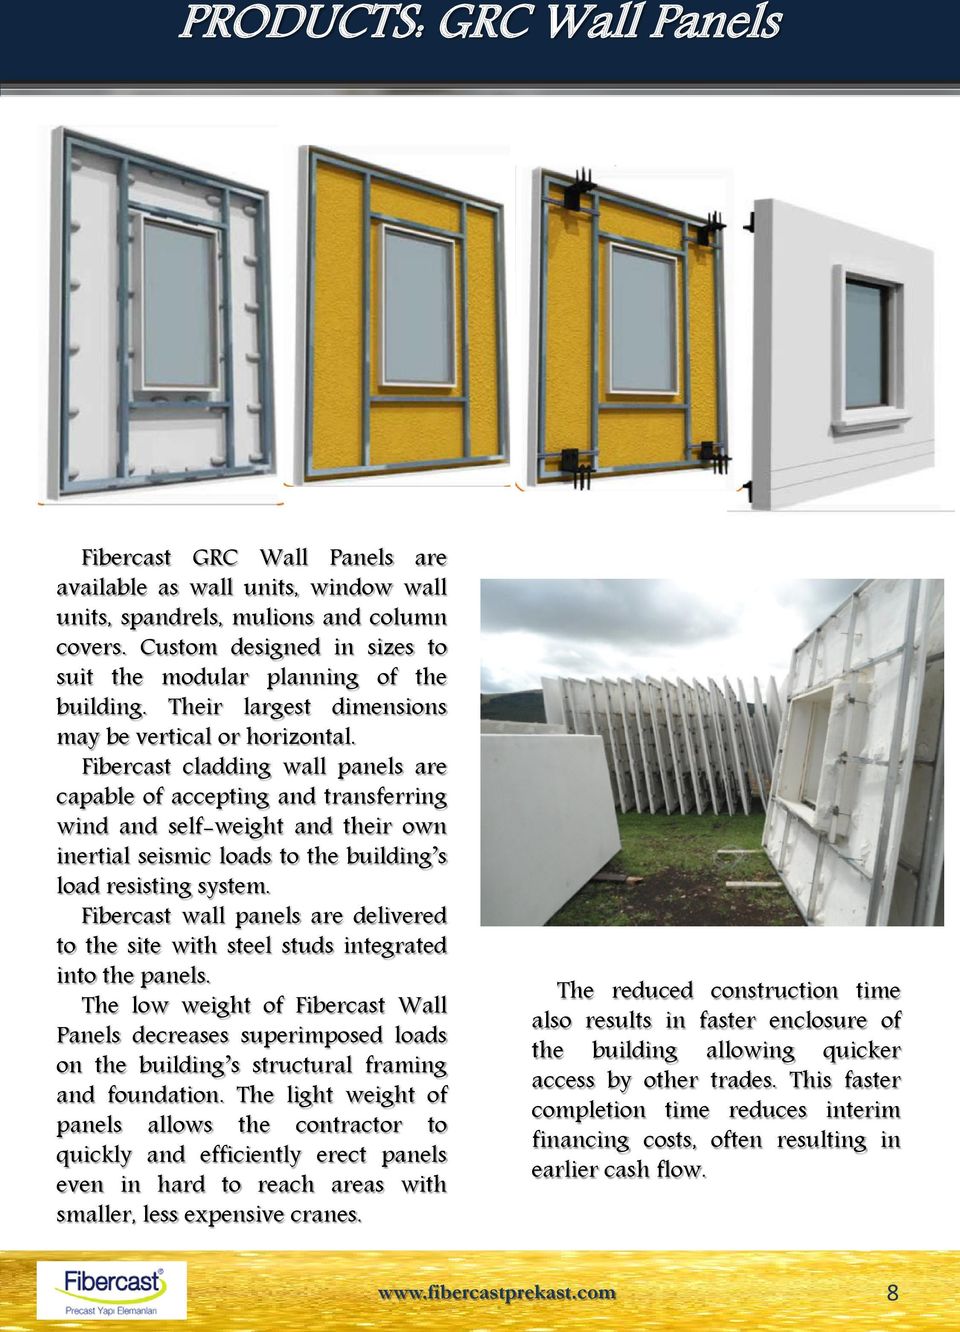 Fibercast cladding wall panels are capable of accepting and transferring wind and self-weight and their own inertial seismic loads to the building s load resisting system.